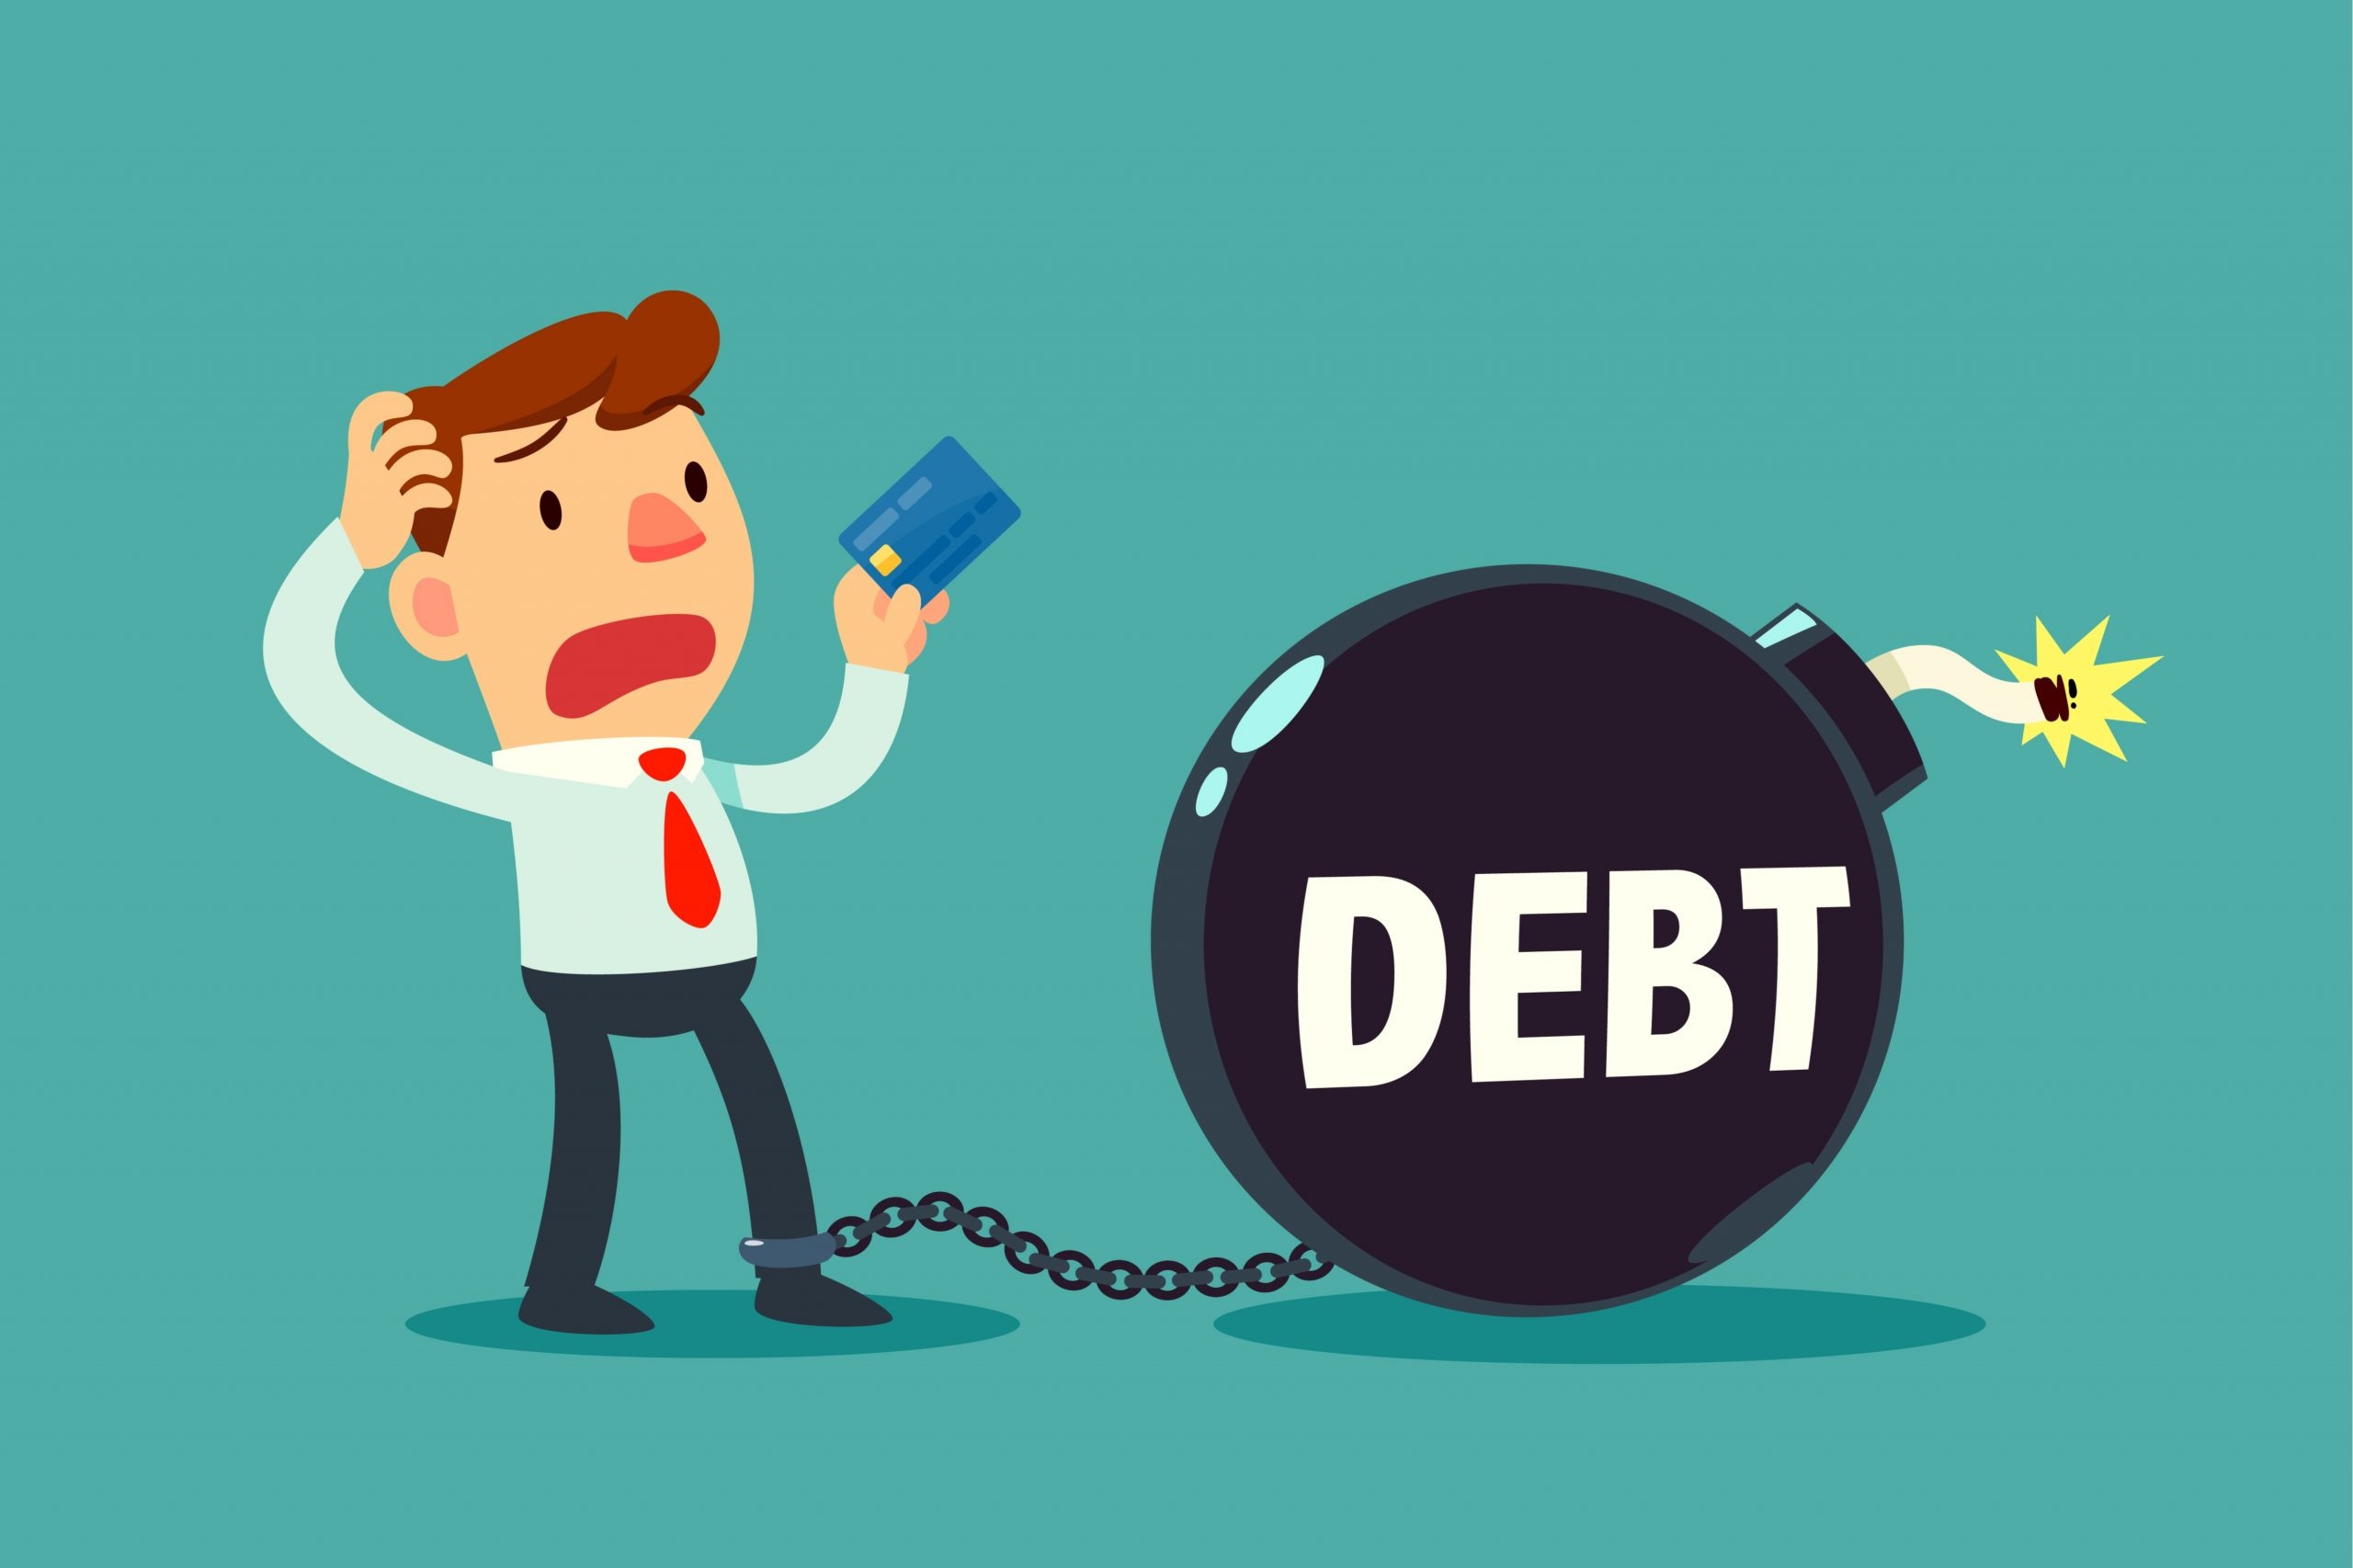 Business owners have to be completely responsible for all the debts their business meets